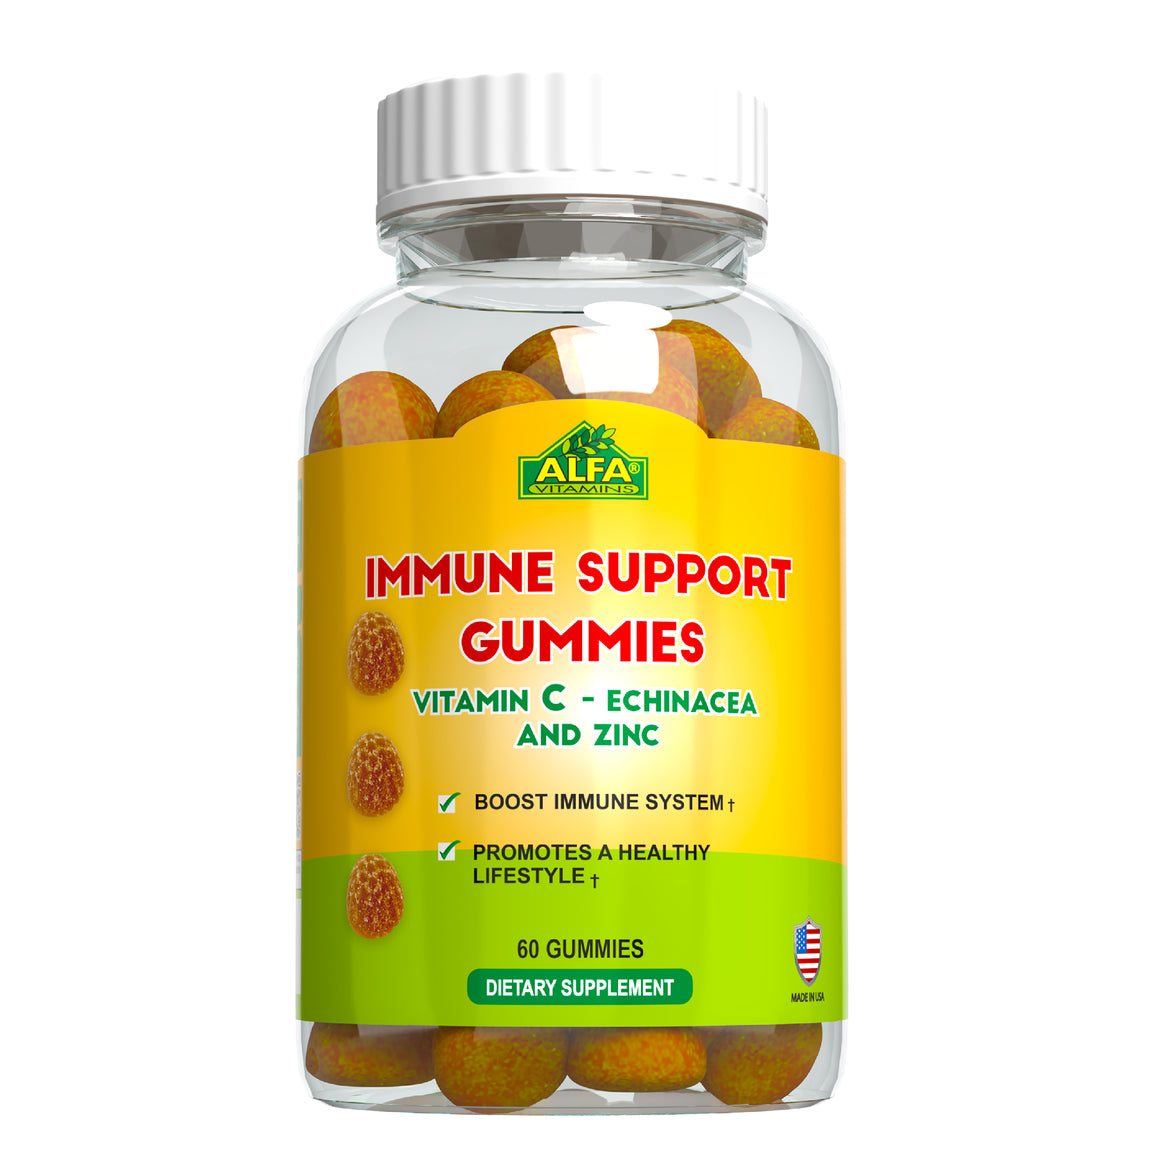 Immune Support Gummies for Adults - 60 Gummies